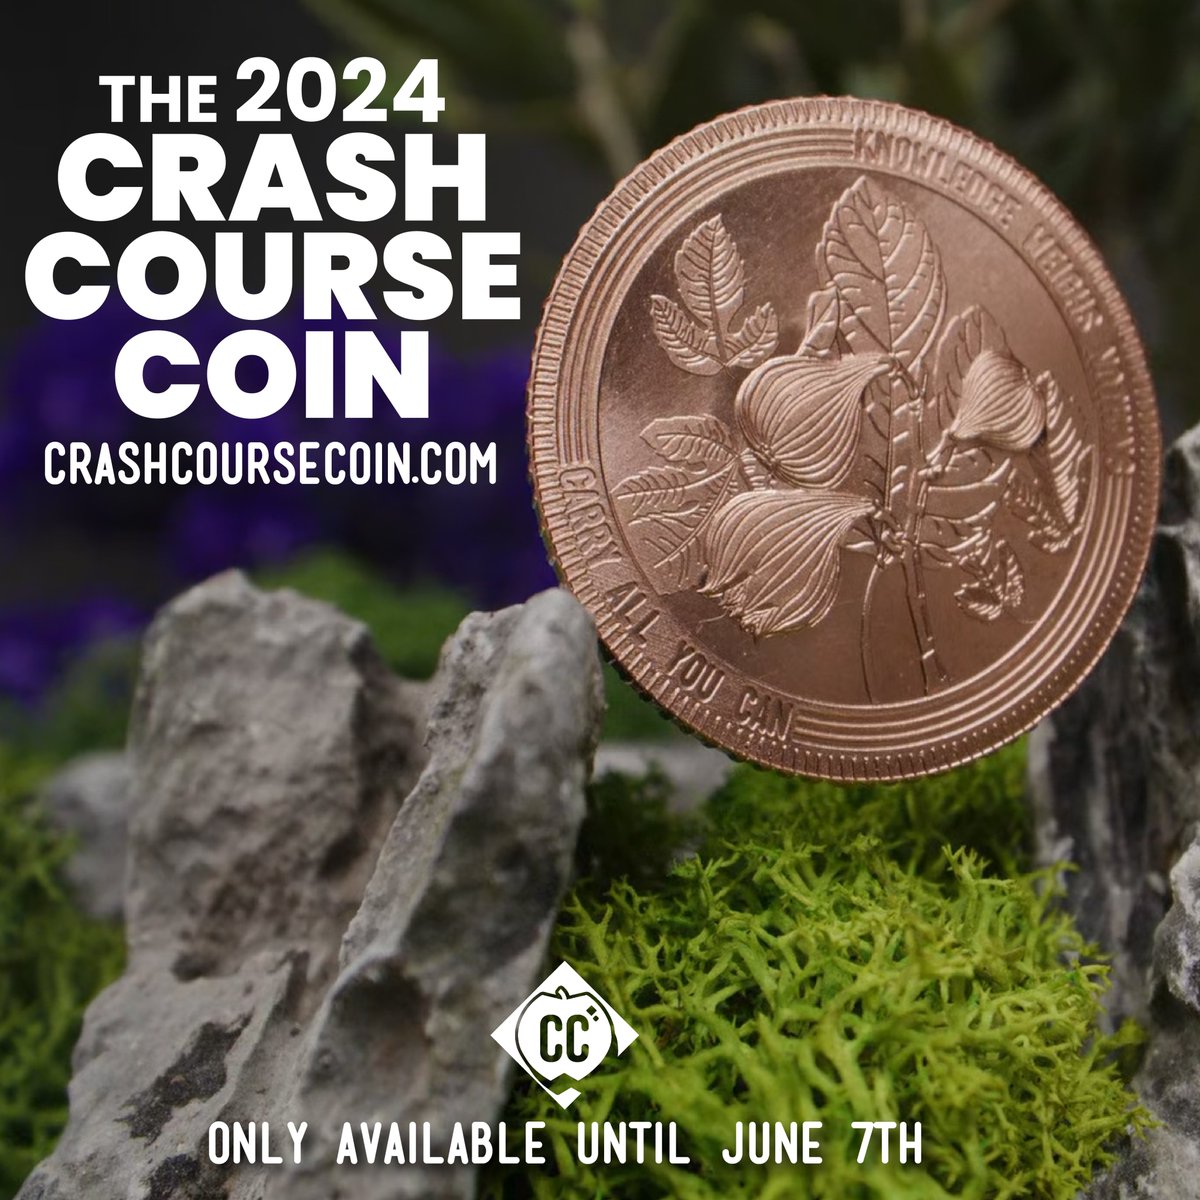 Since 2012, Crash Course has produced more than 50 series made up of over 1500 videos, educating hundreds of millions of viewers around the world — without charging them a single penny.